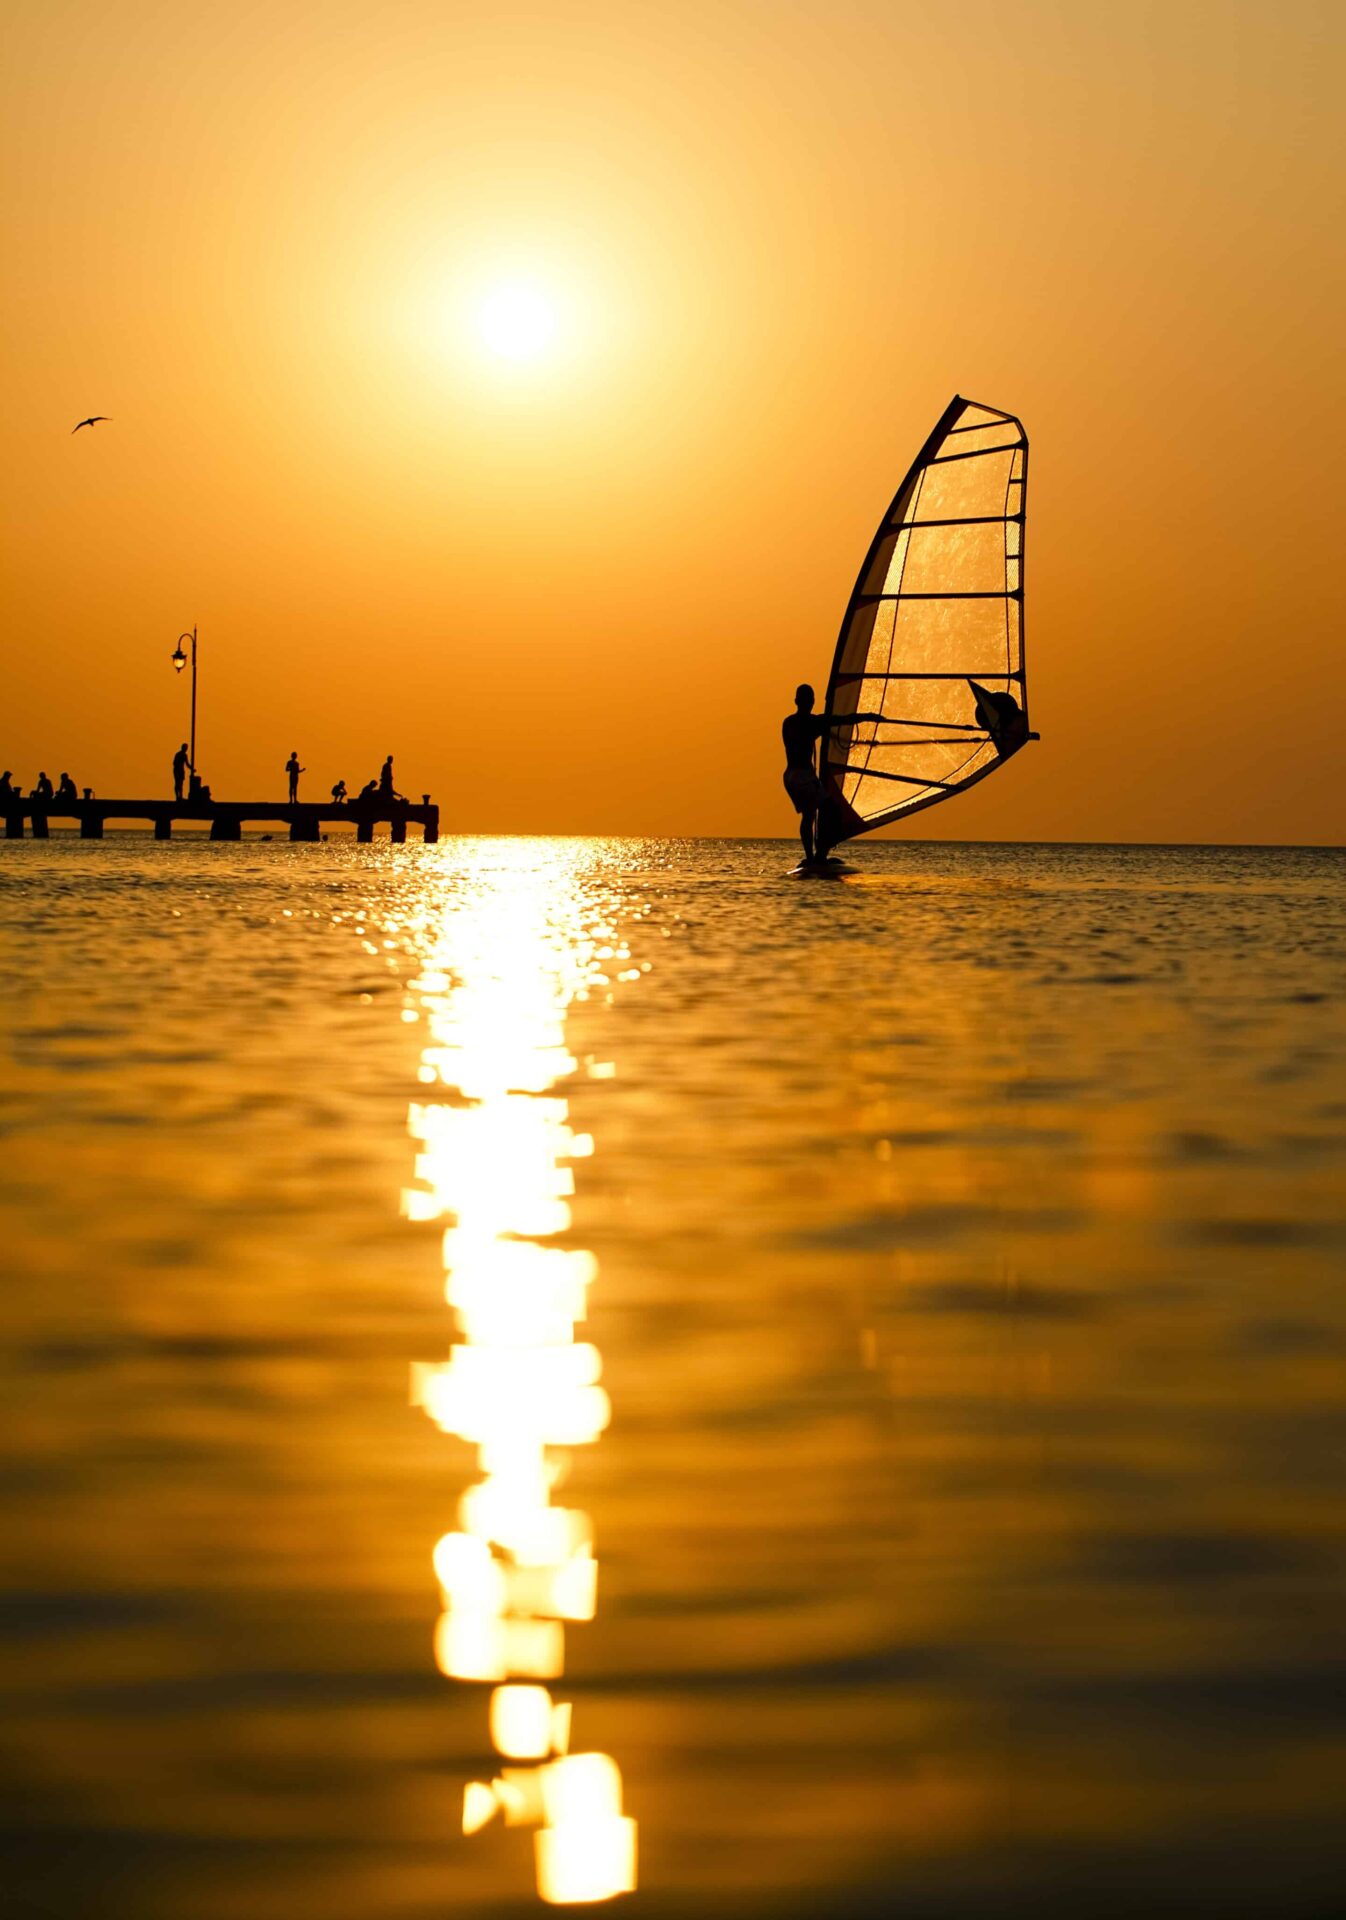 Discover Florida's Space Coast & Treasure Coast: Cocoa Beach: Man passing by with his windsurf or sailboard at sunset on a calm ocean against a spectacular vivid orange sky